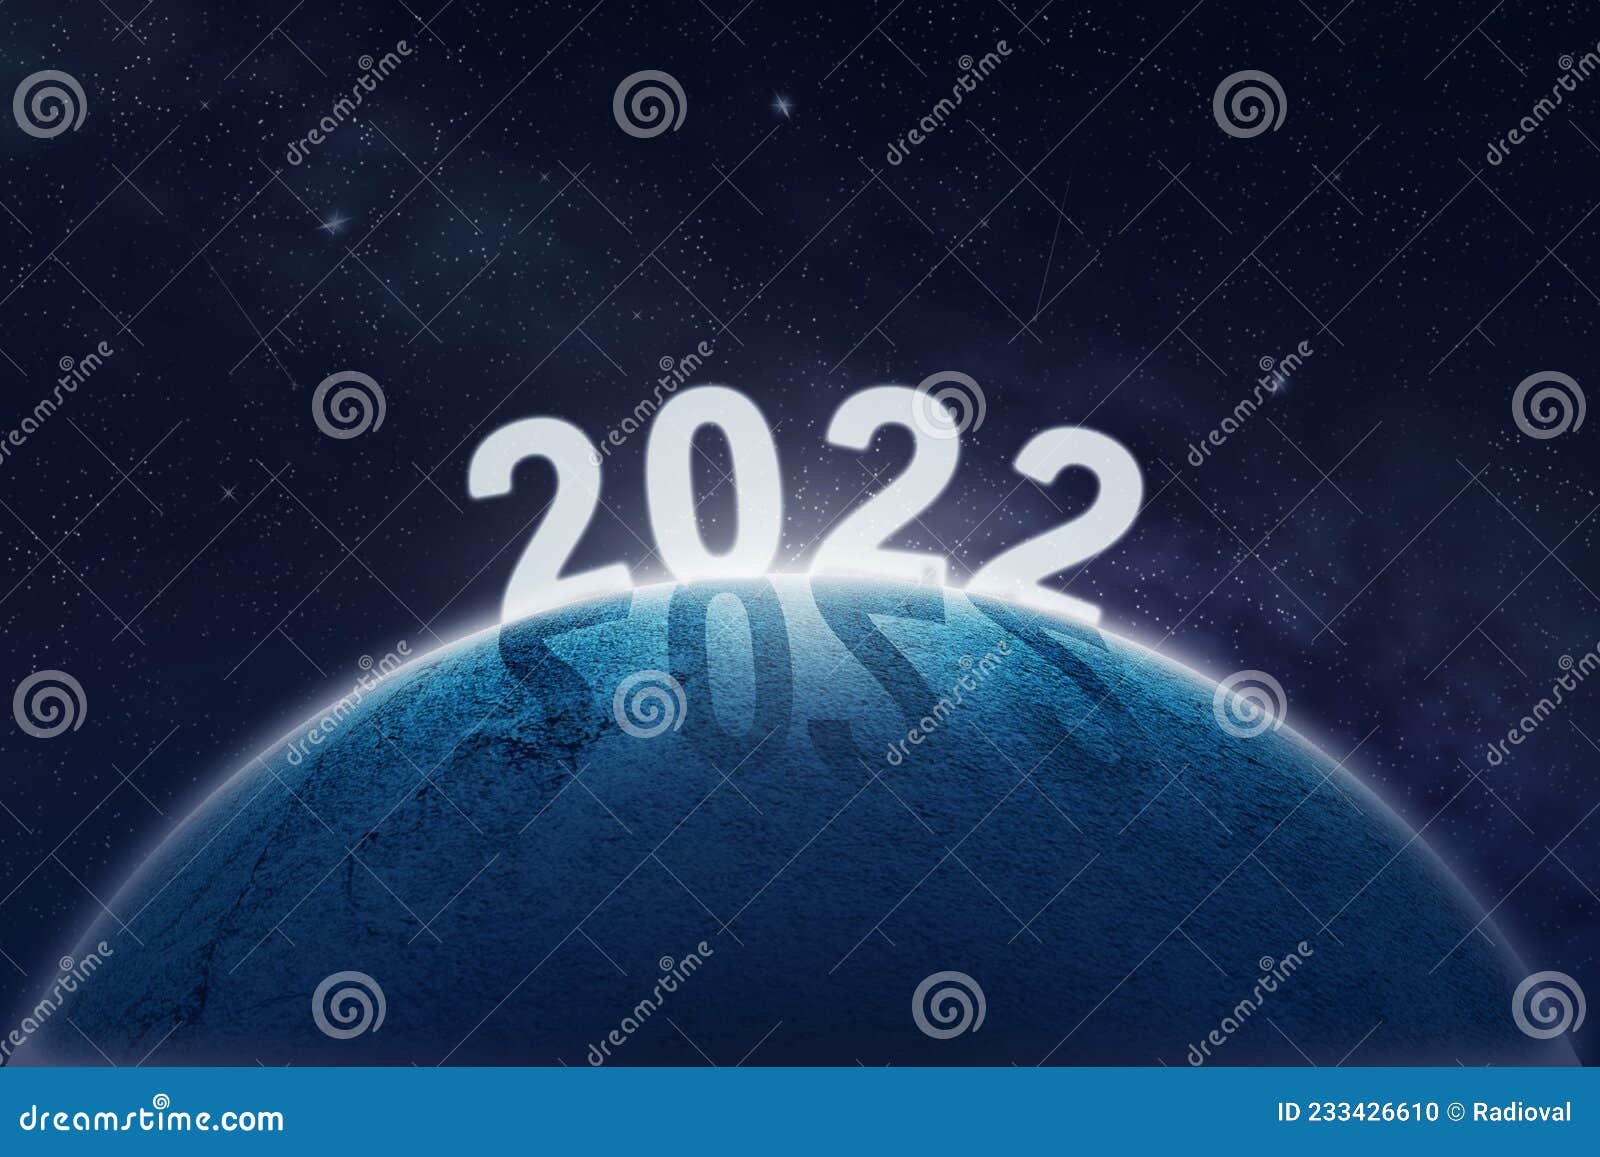 2022, Numbers on the Planet in Space. New Year Concept. Abstract ...